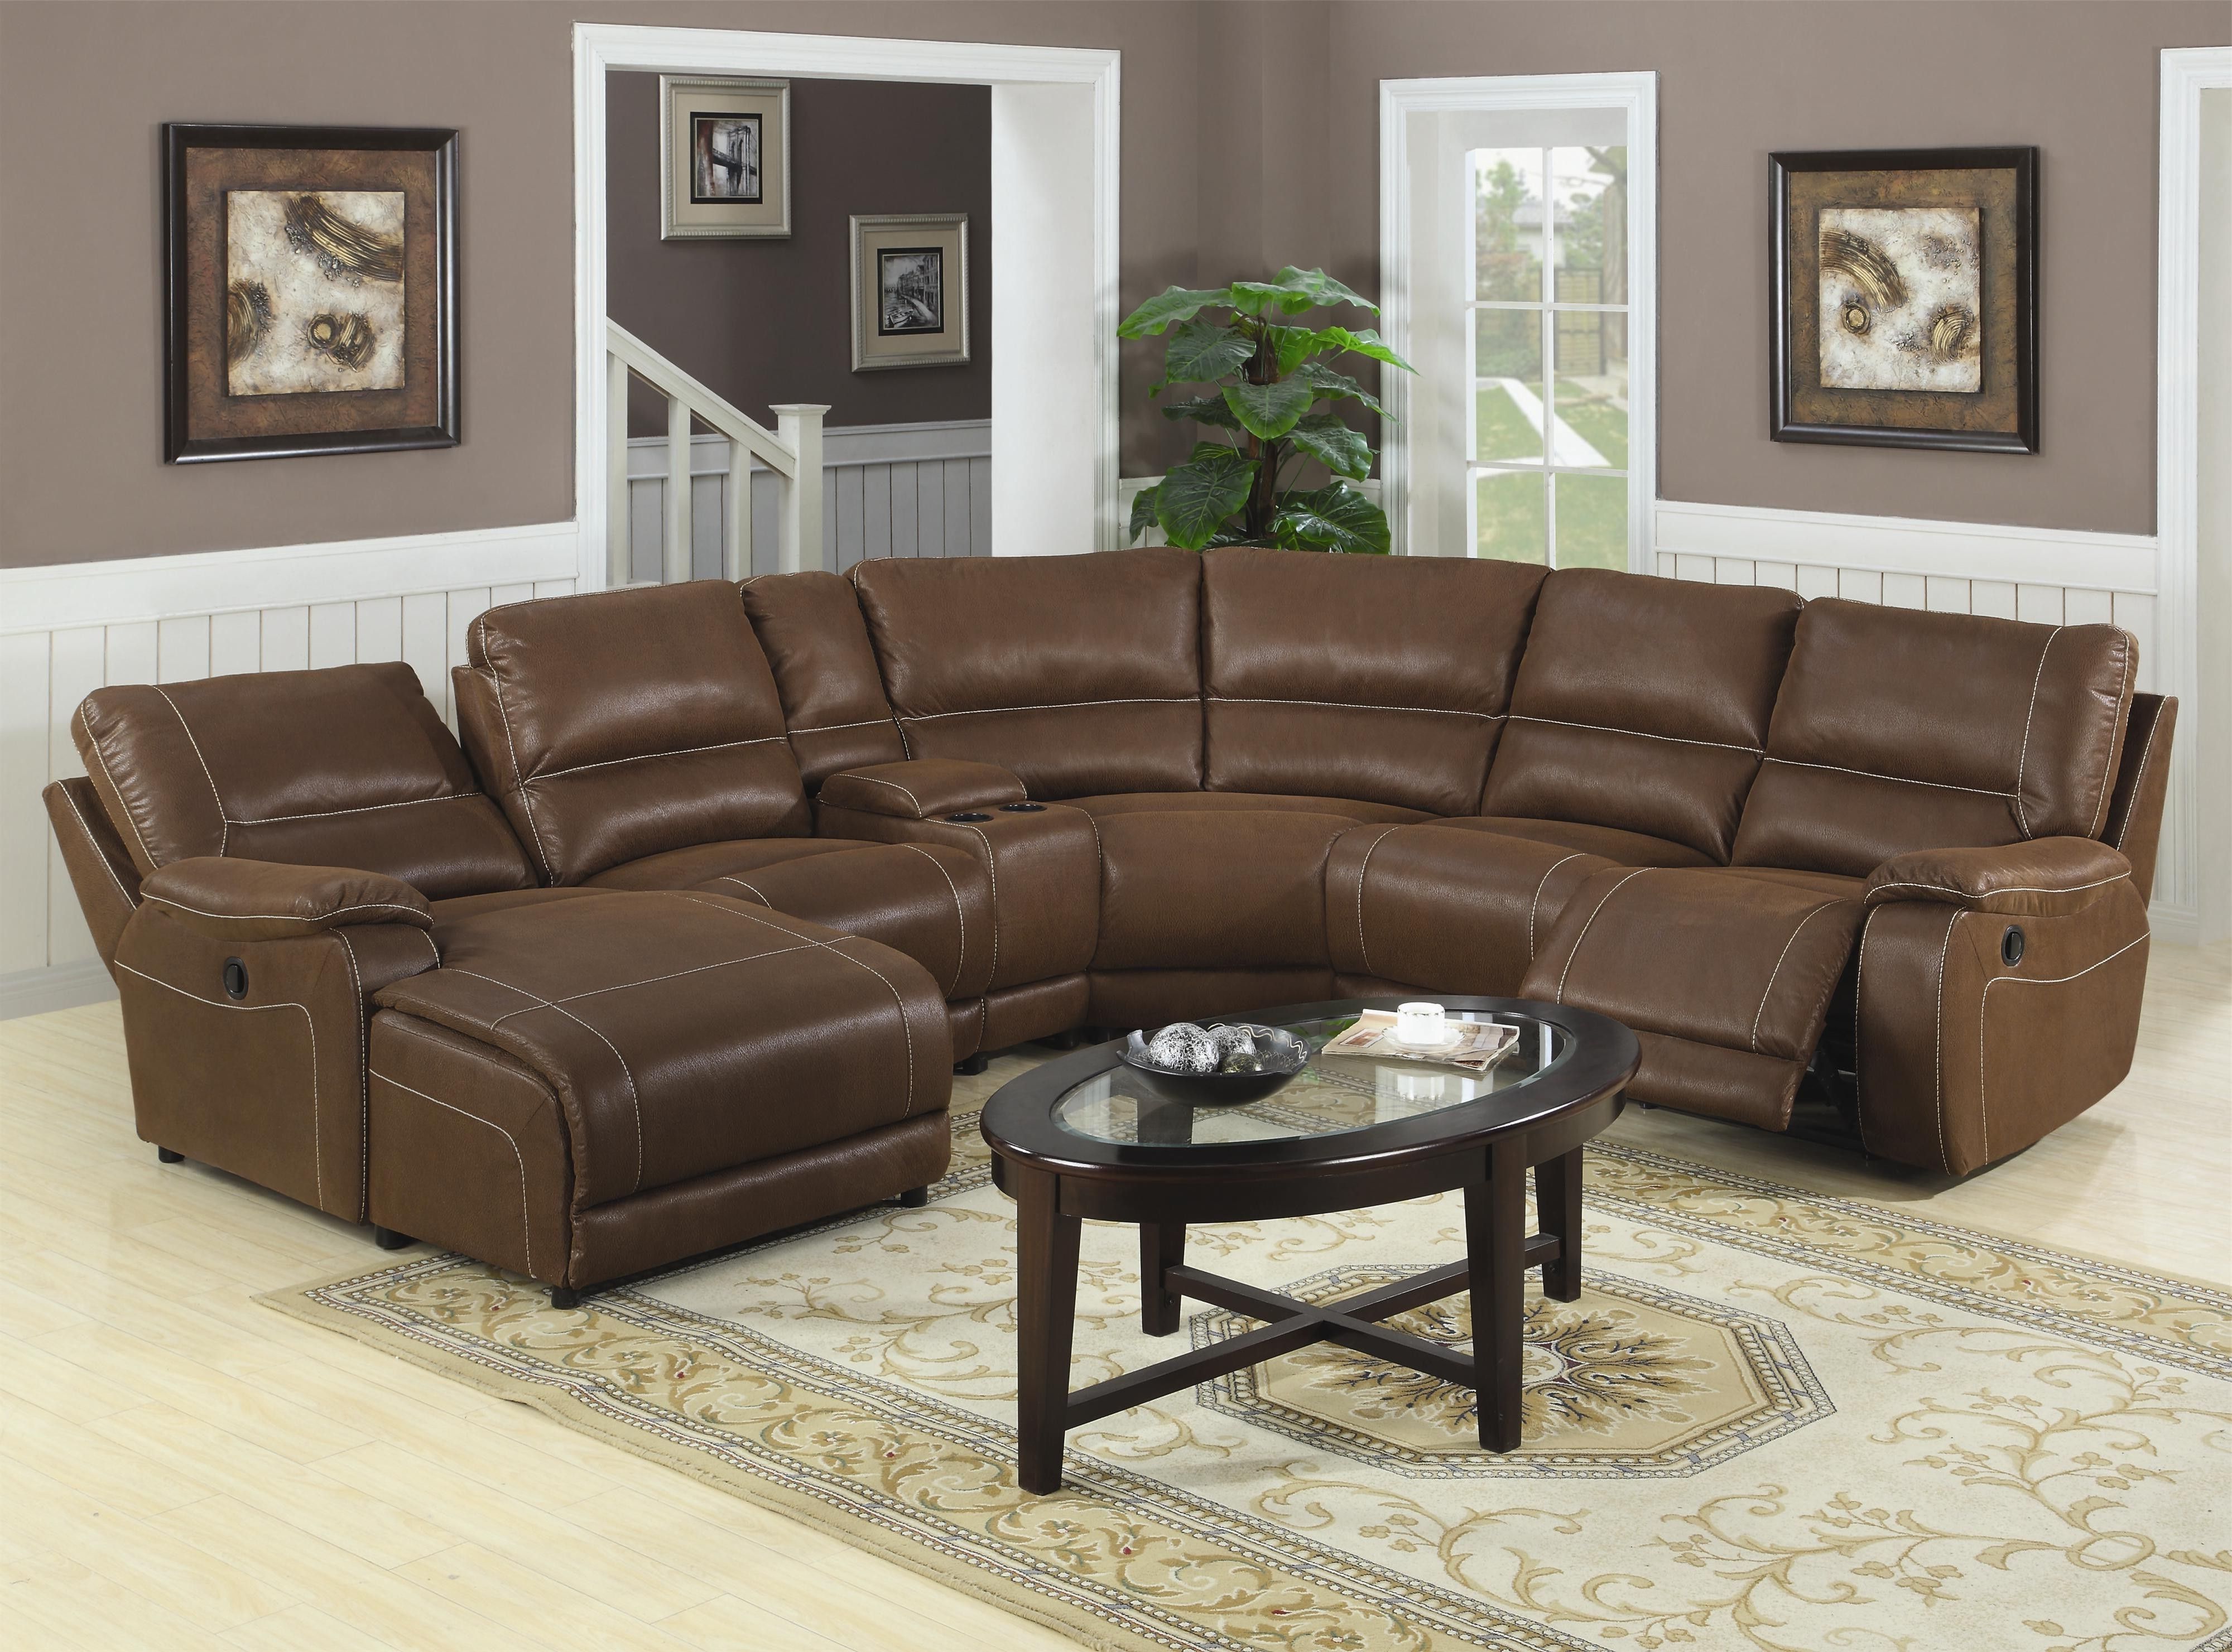 Sofa : Ashley Maier Sectional Sofa Laura Ashley Sectional Sofa Regarding Favorite Red Leather Sectional Sofas With Recliners (View 12 of 20)